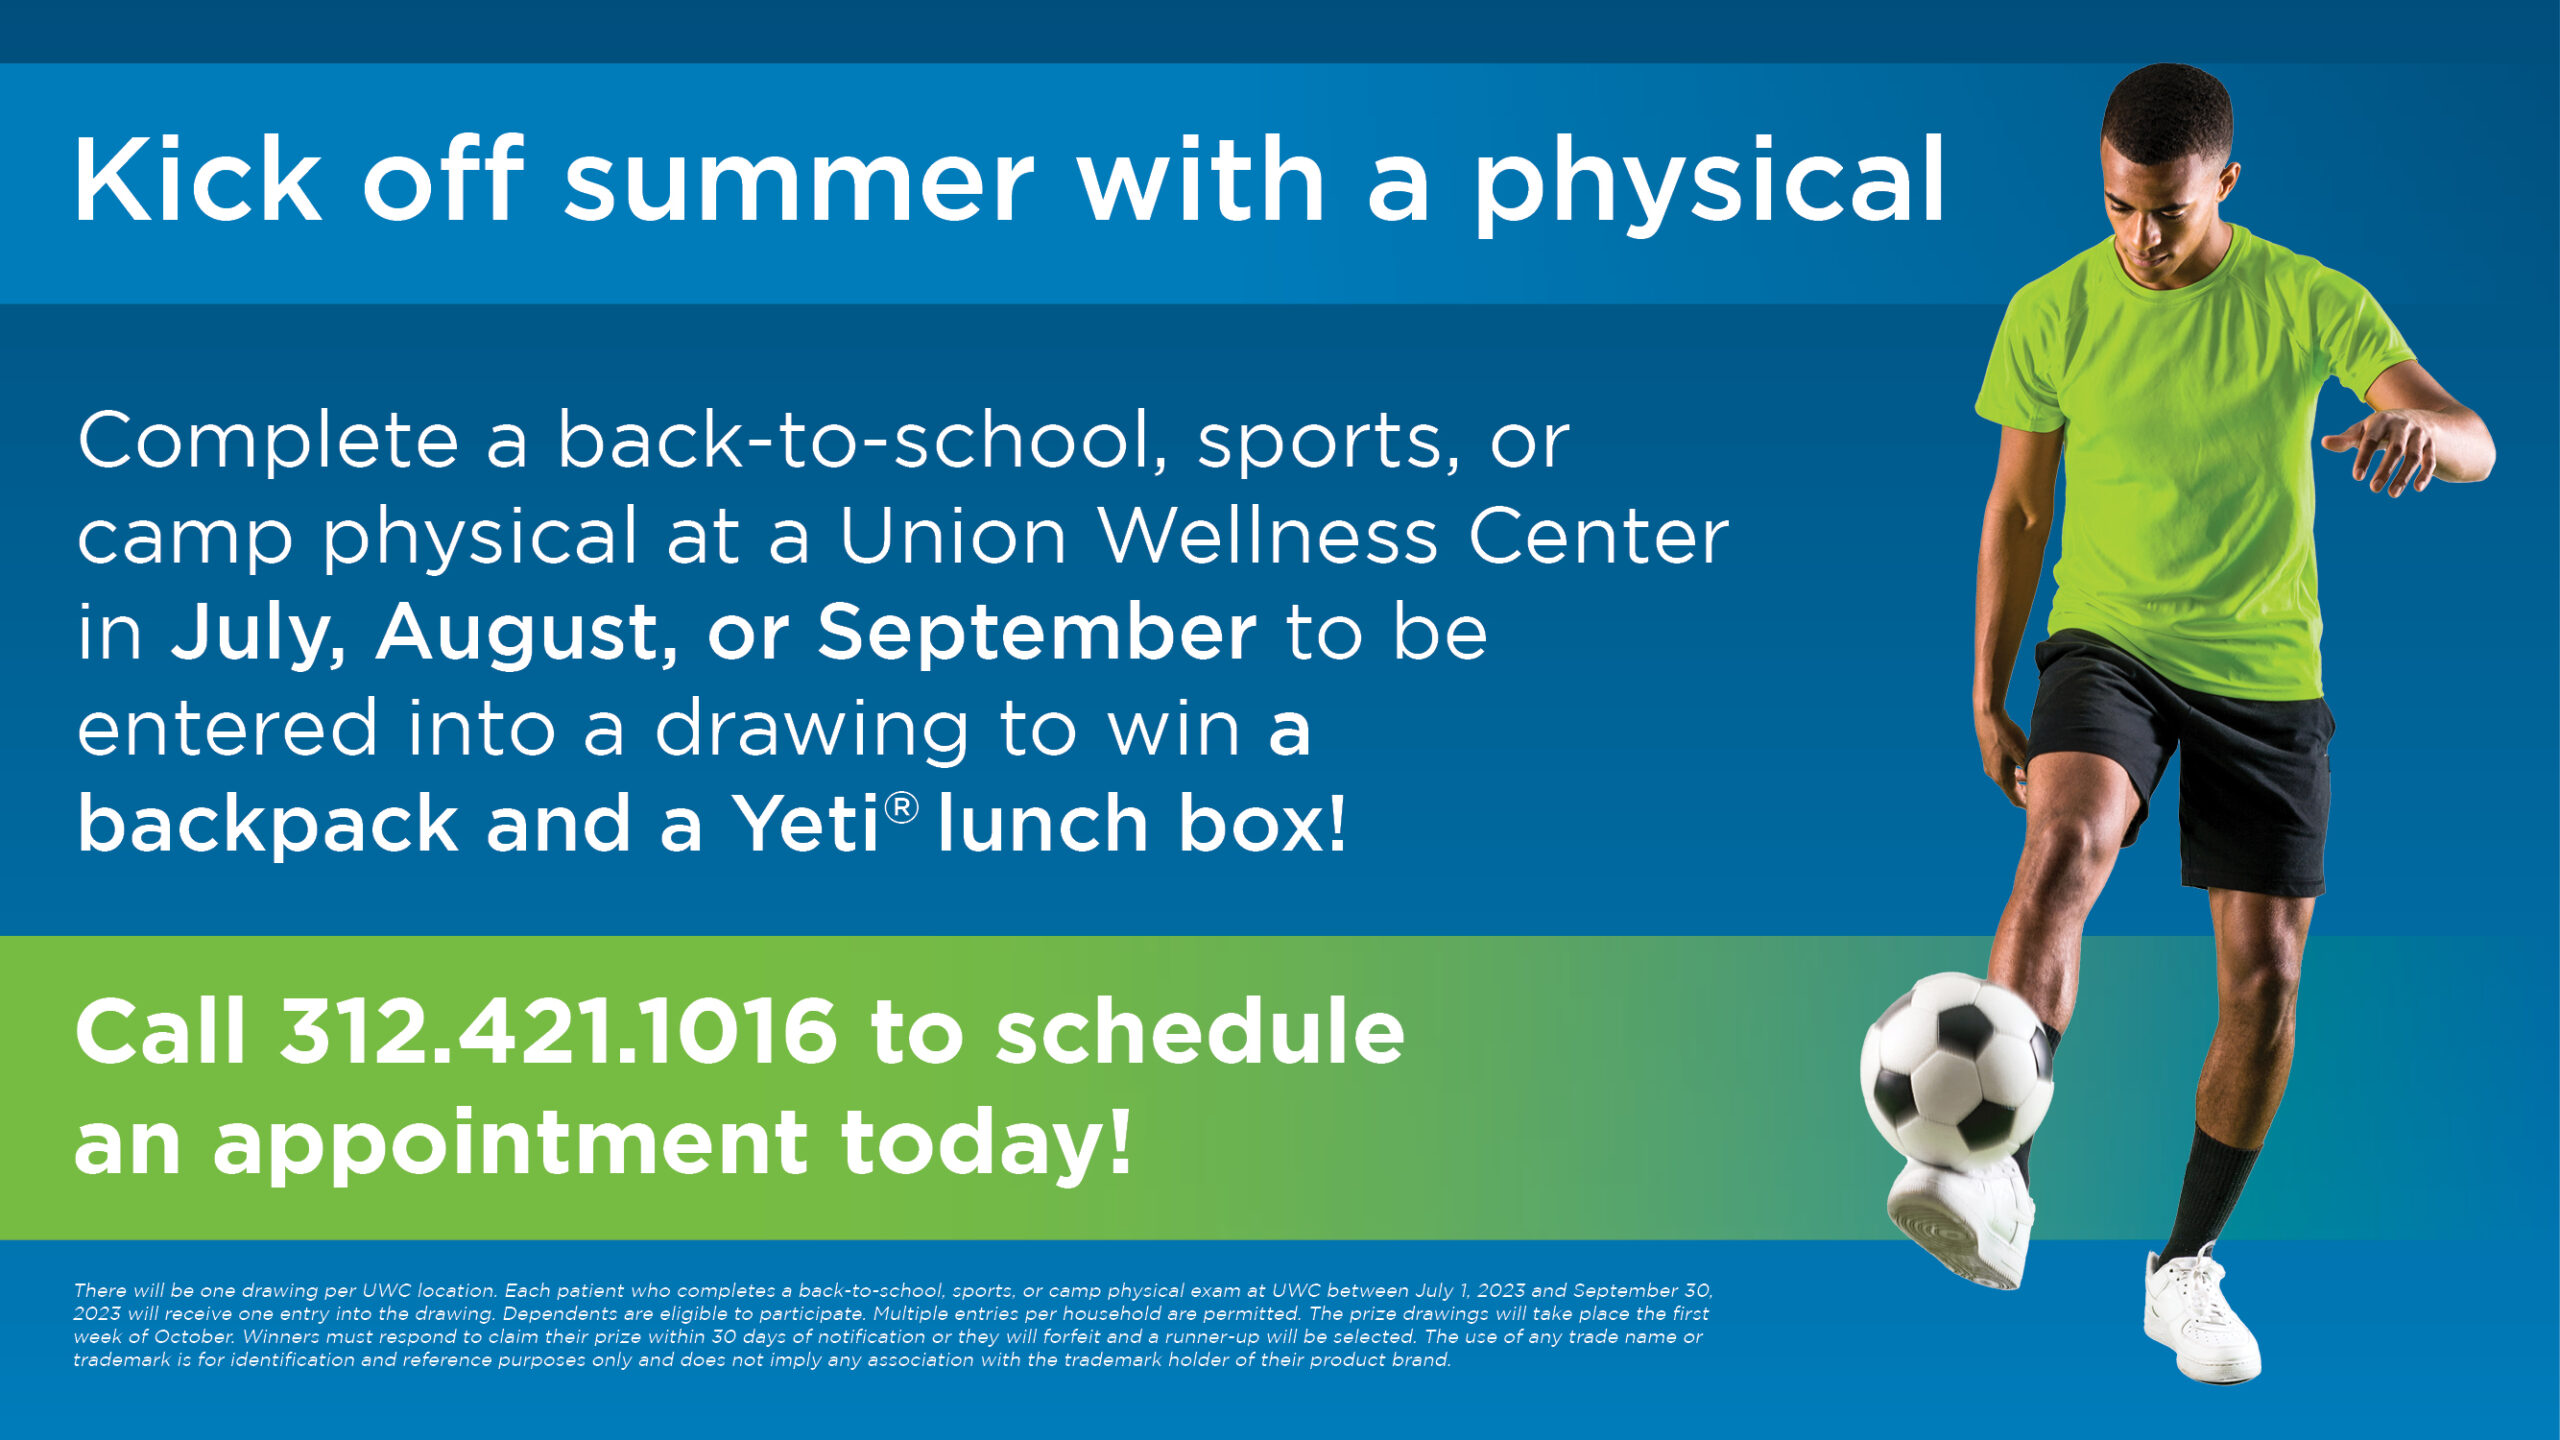 Kick off summer with a physical and you could win! See details here.